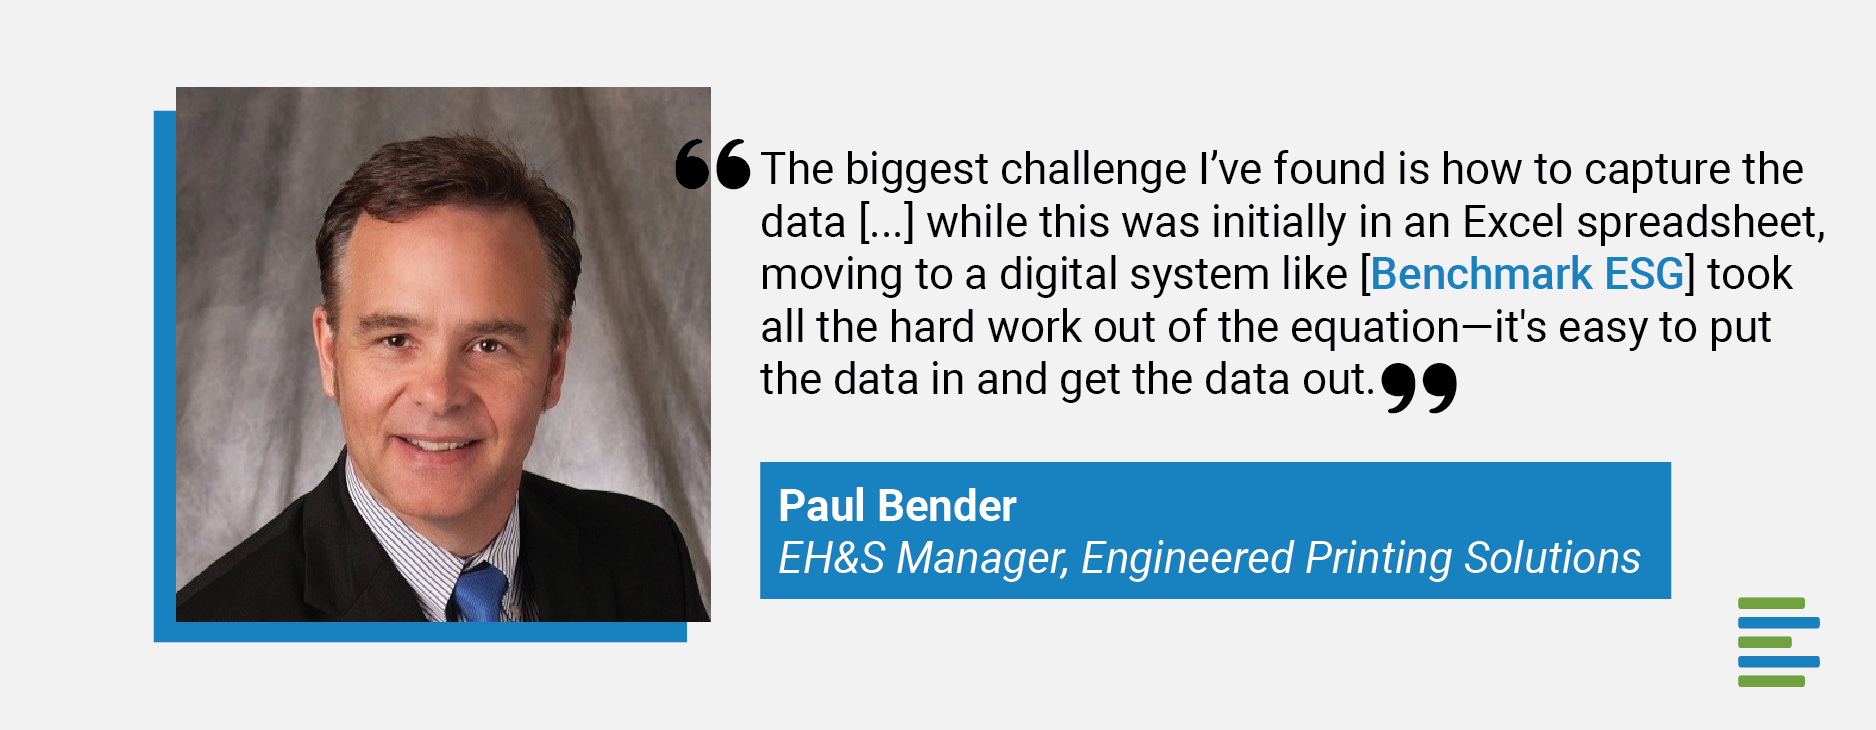 Creating Dynamic EHSQ Solutions to Meet Customer’s Evolving Needs: From Benchmark Champion Paul Bender